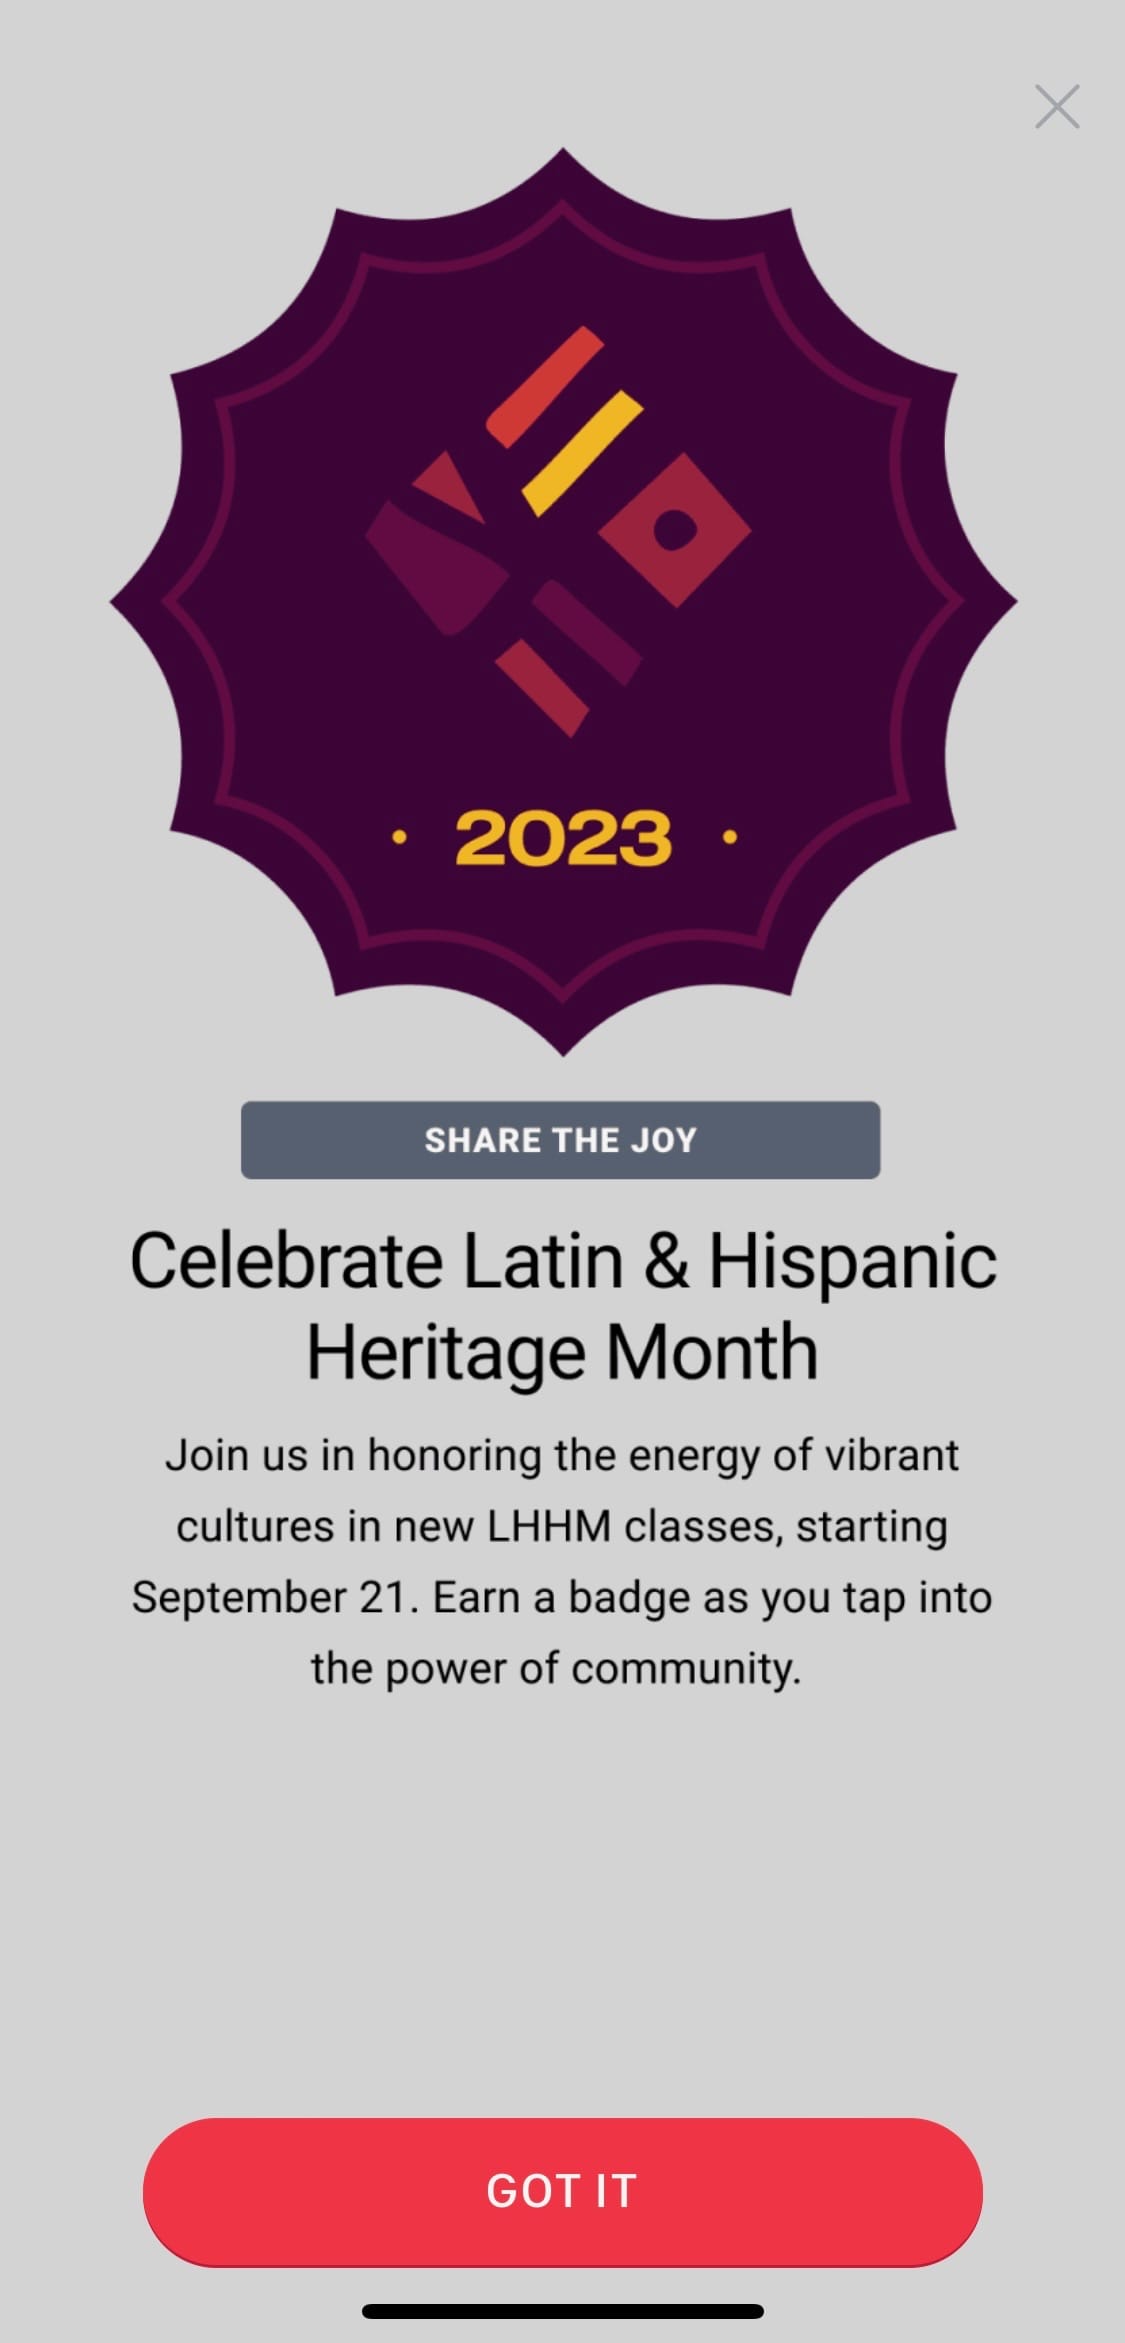 Pop-up on Peloton devices and apps ahead of Latin & Hispanic Heritage Month.